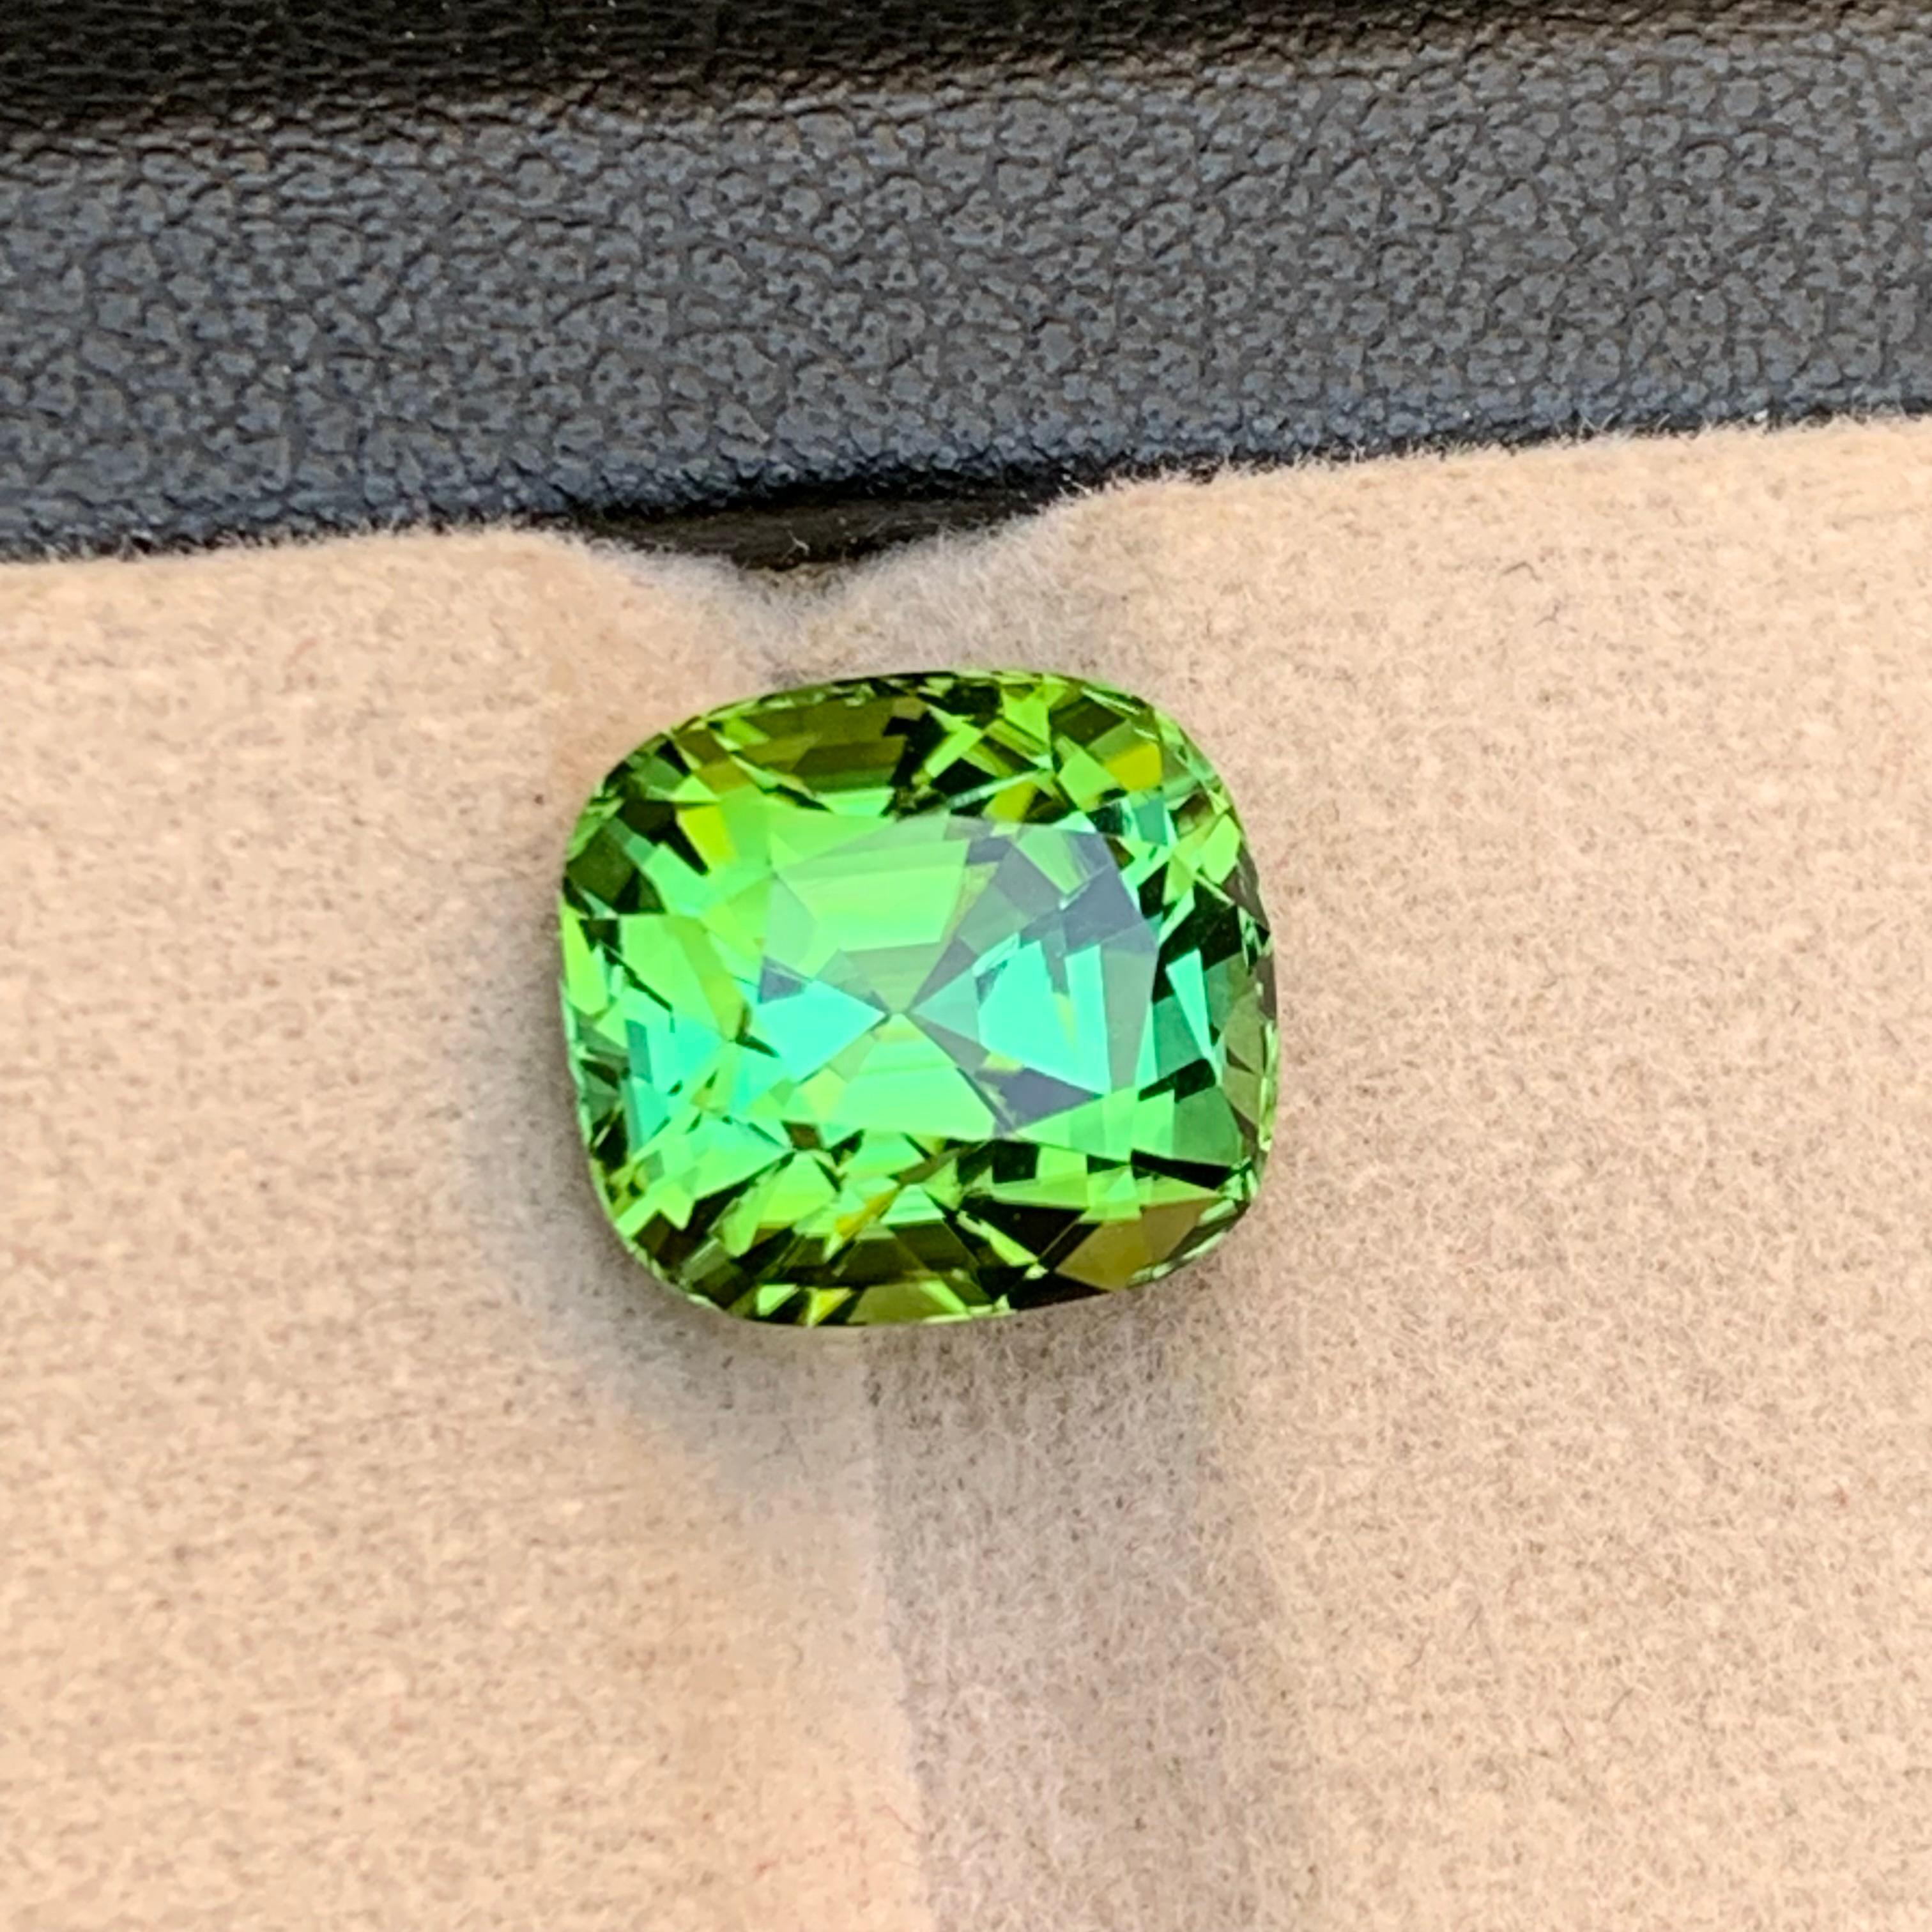 Rare Mint Green Natural Tourmaline Loose Gemstone, 5.80 Ct Cushion Cut for Ring For Sale 4